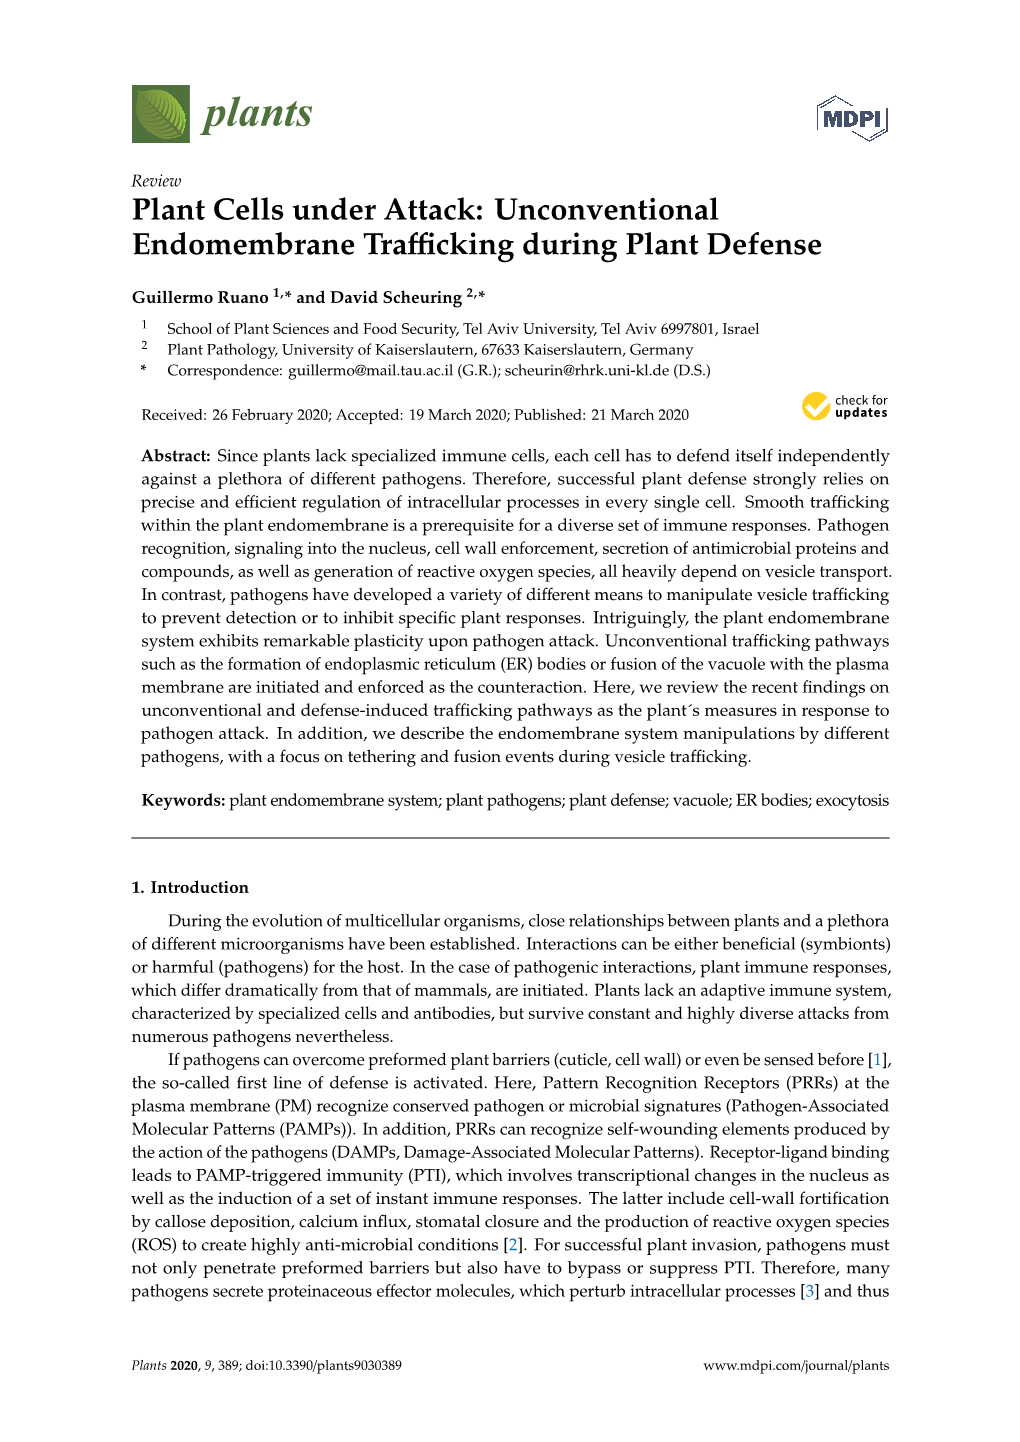 Unconventional Endomembrane Trafficking During Plant Defense